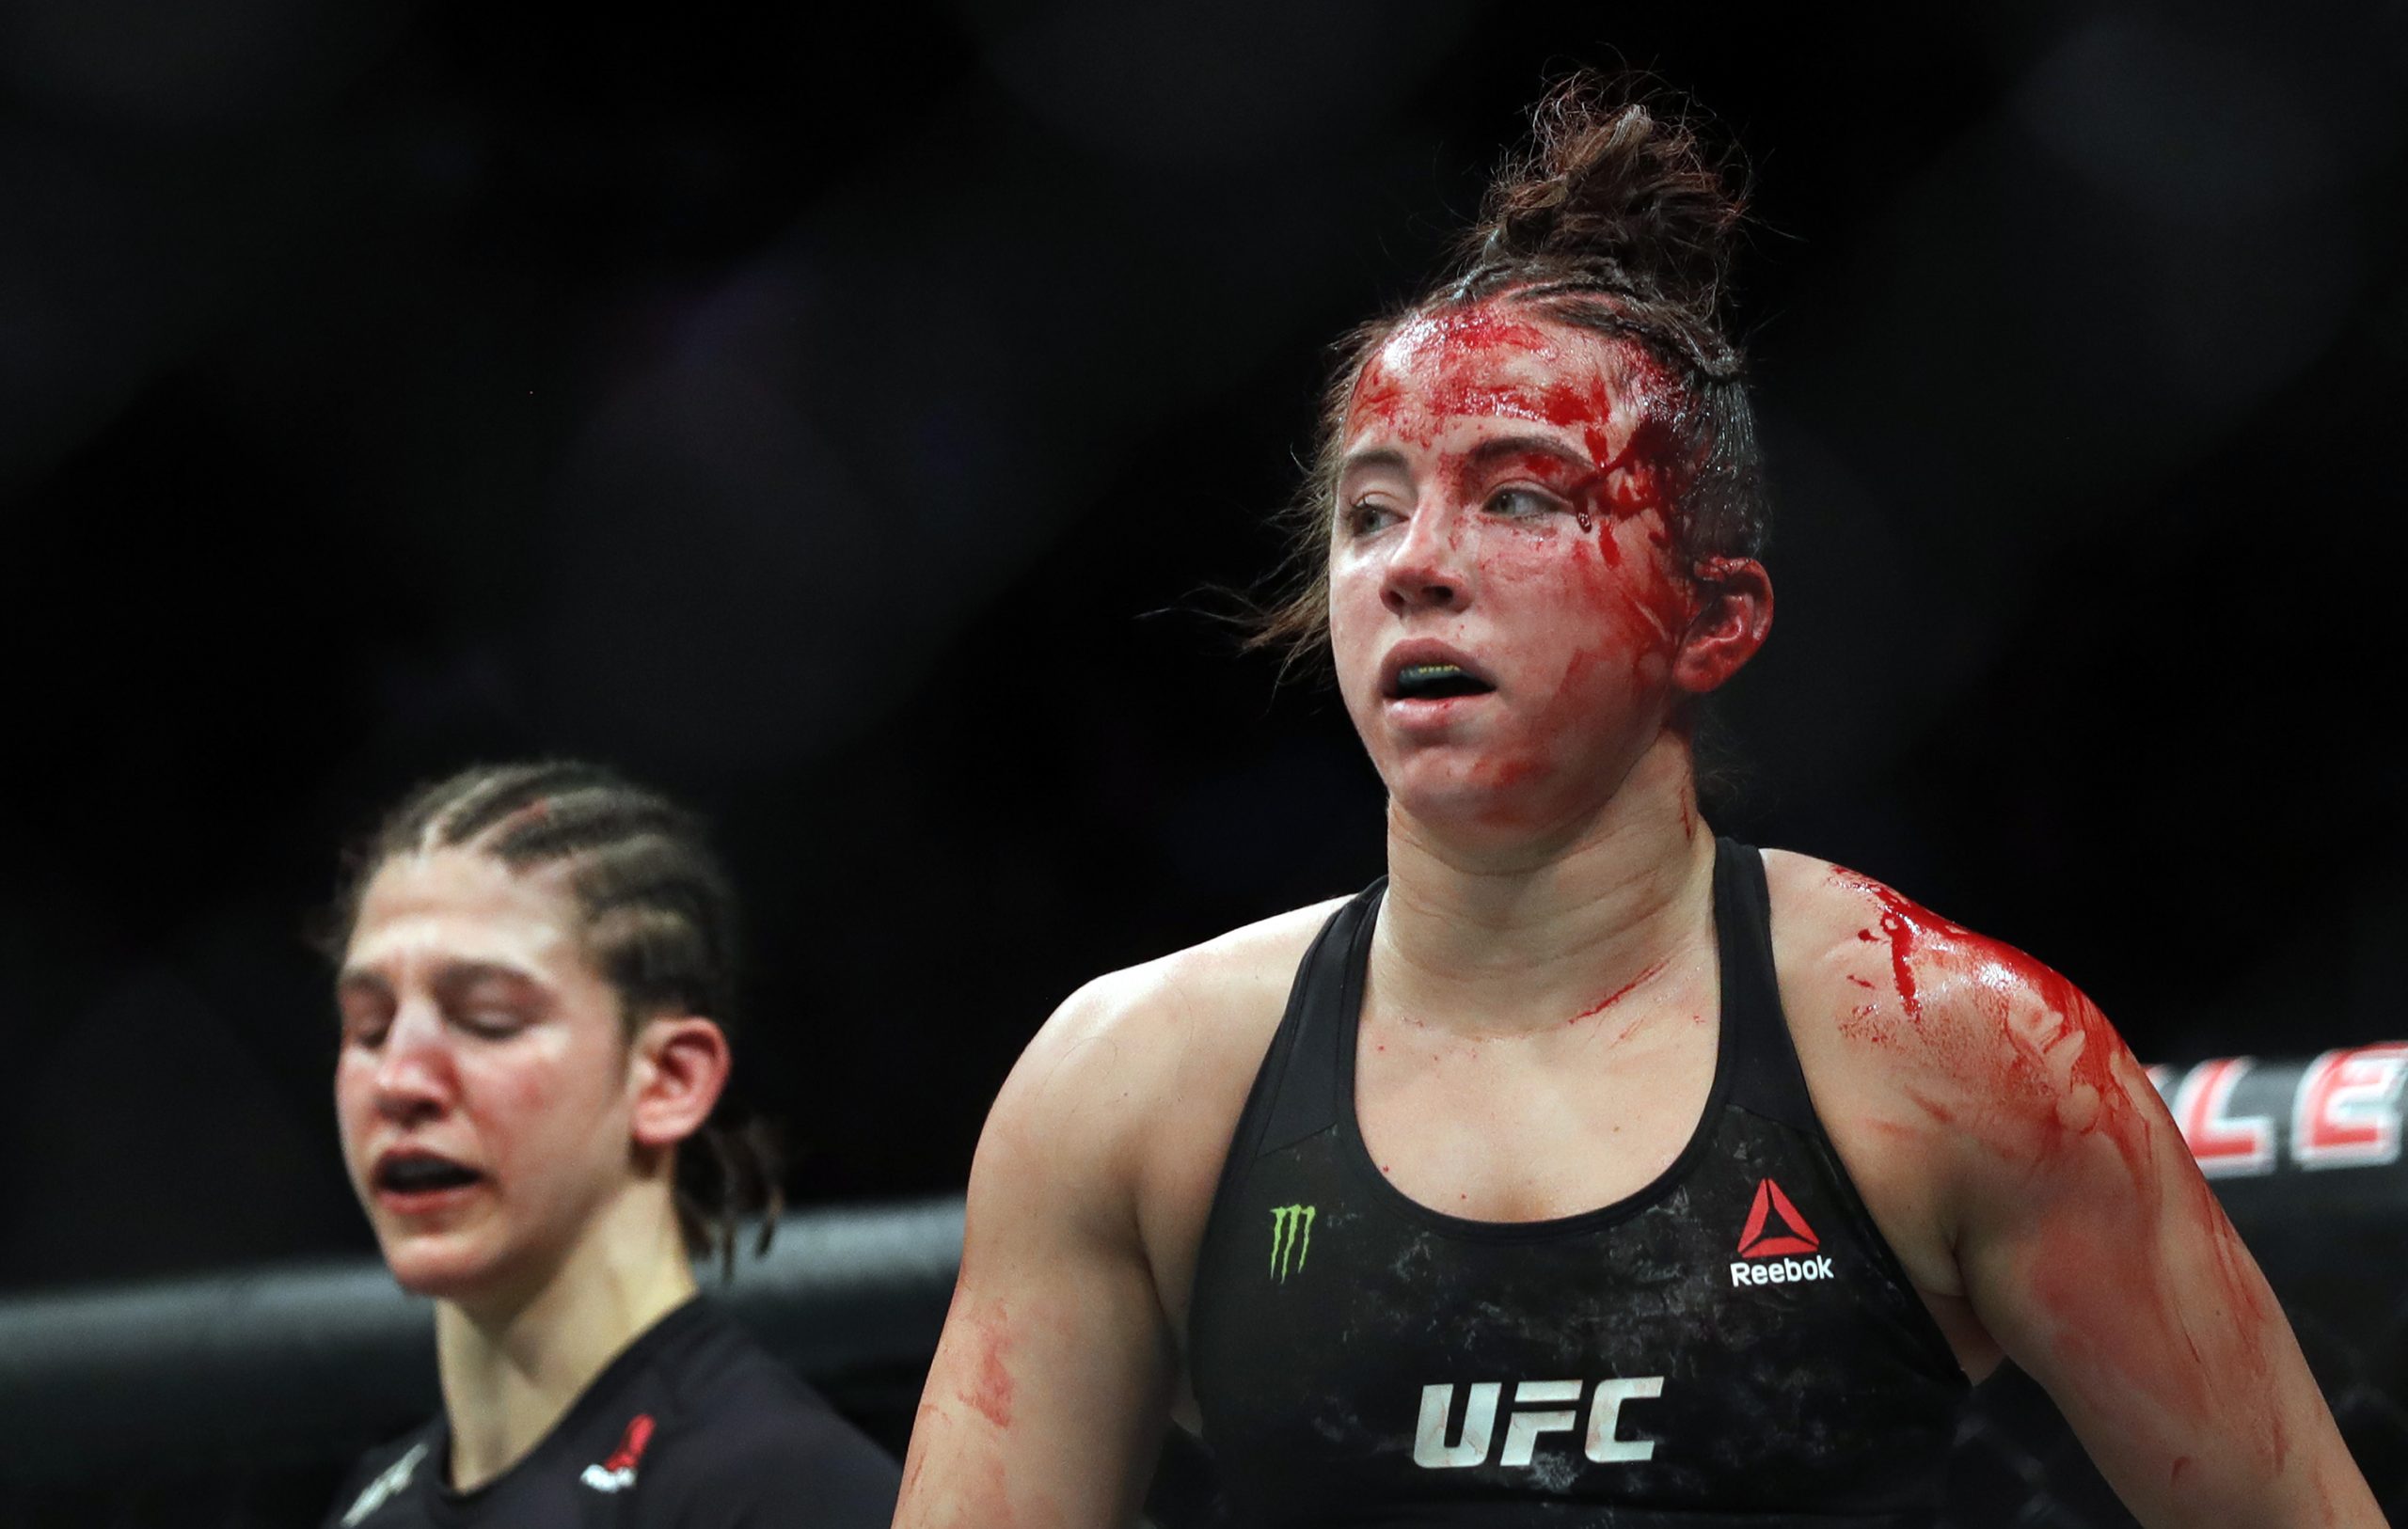 Maycee Barber has one loss in her MMA career